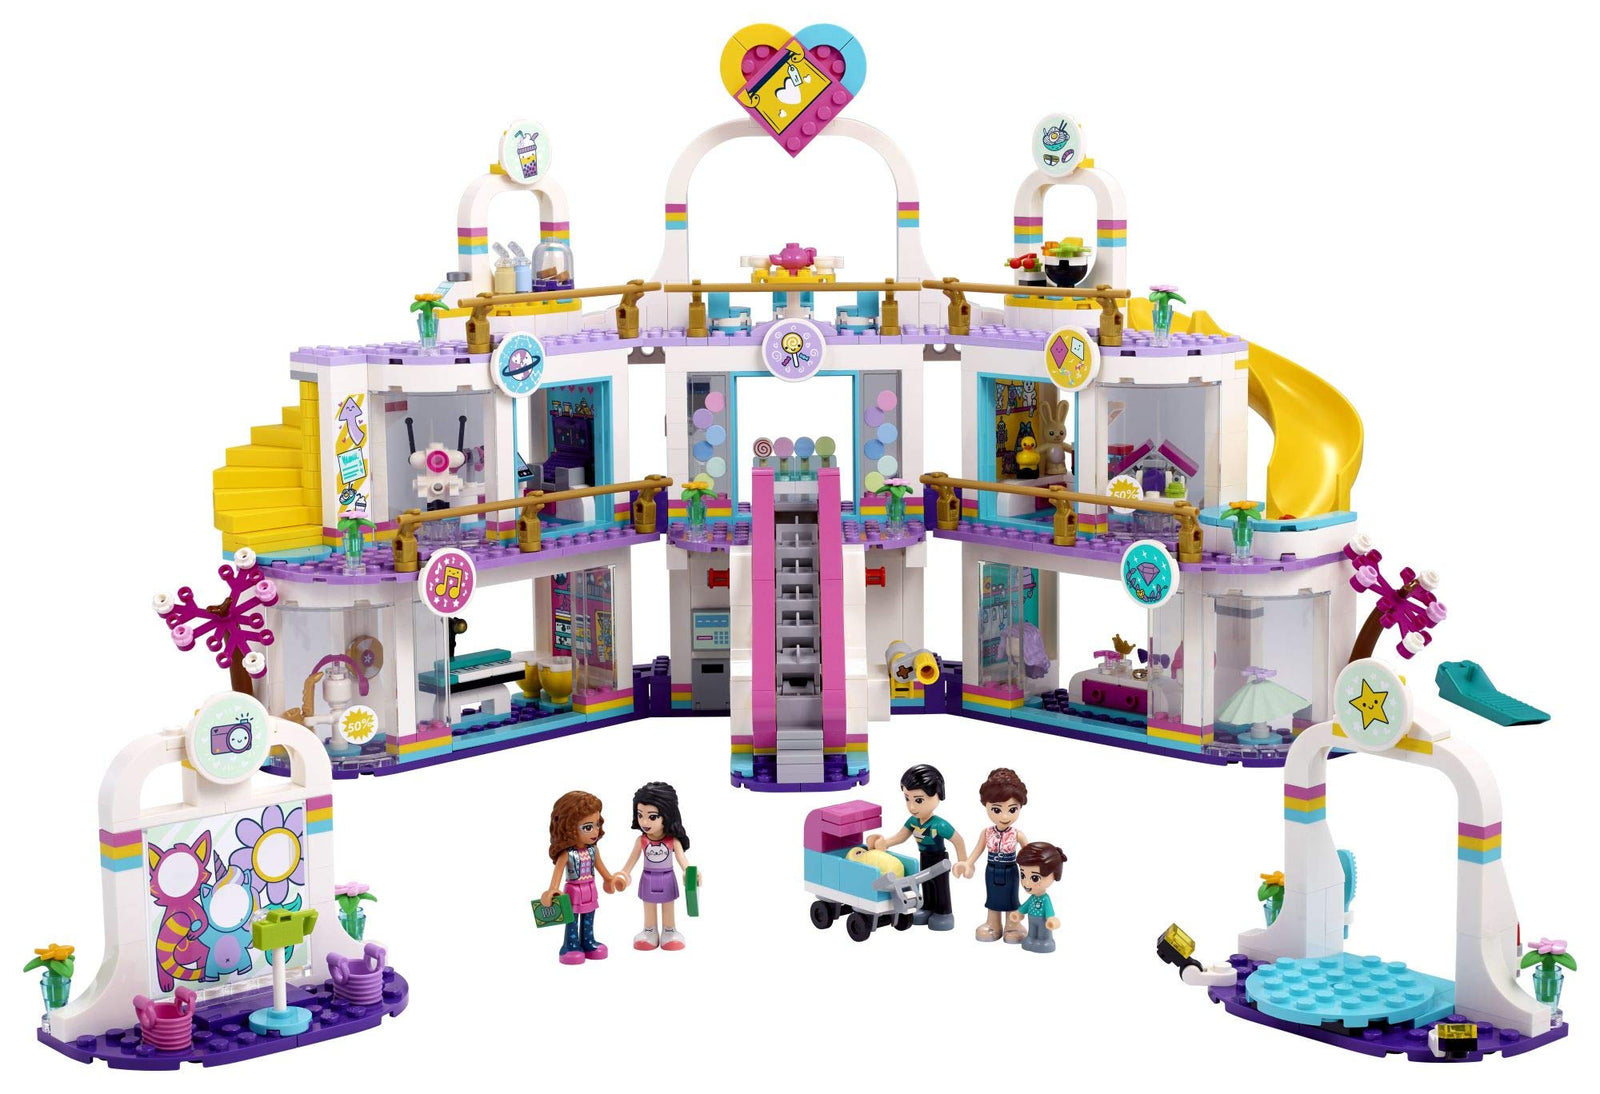 LEGO Friends Heartlake City Shopping Mall 41450 Building Kit; Includes Friends Mini-Dolls to Spark Imaginative Play; Portable Elements Make This a Great Friendship Toy, New 2021 (1,032 Pieces)